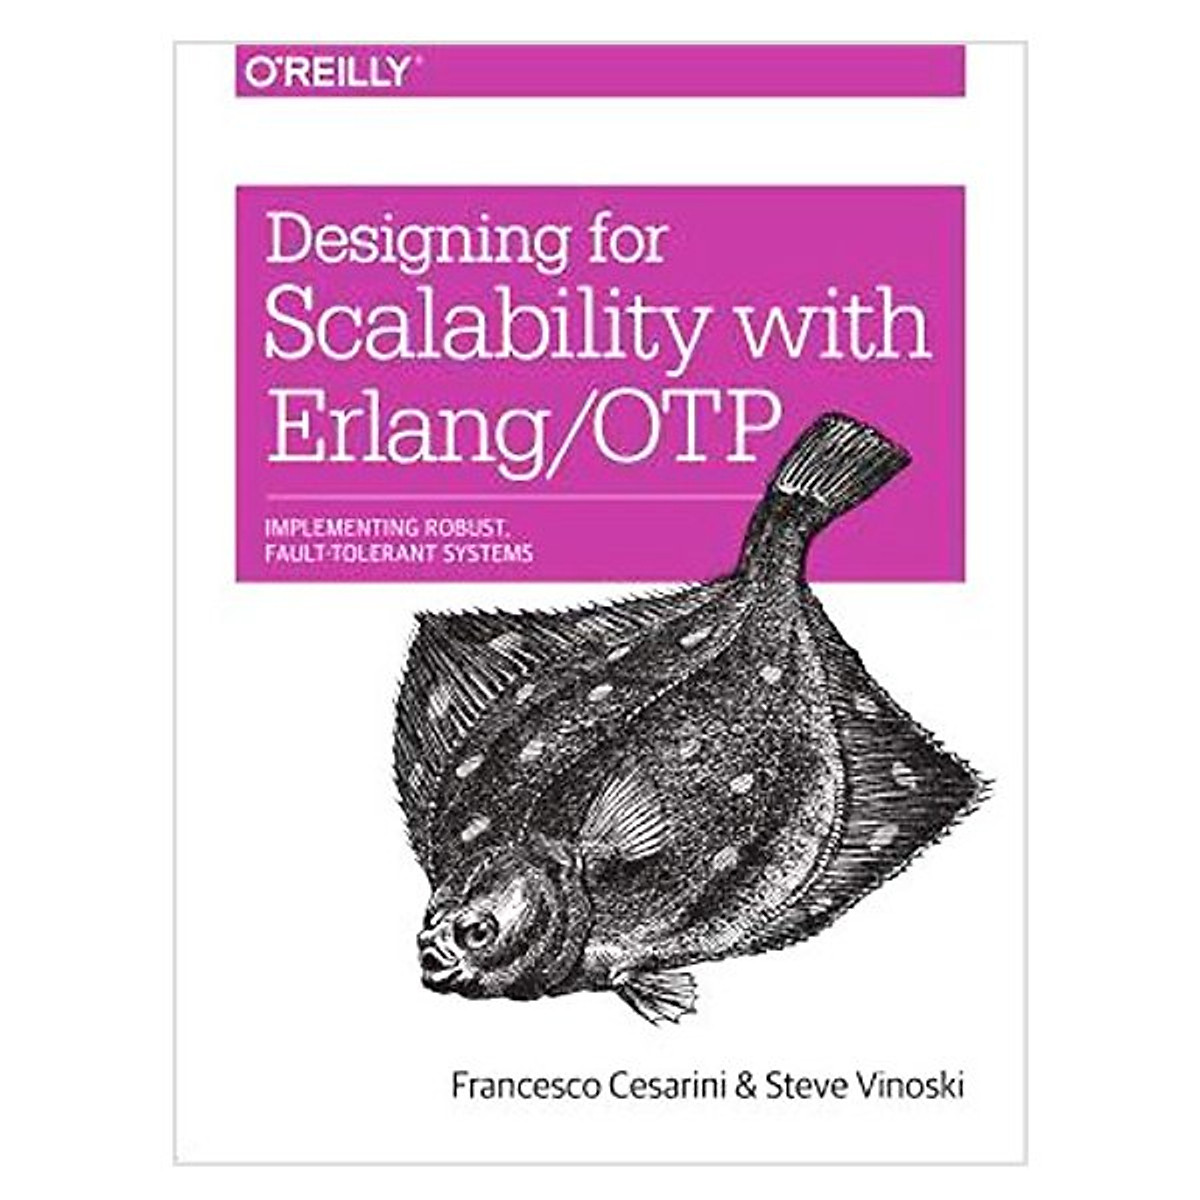 [Hàng thanh lý miễn đổi trả] Designing for Scalability with Erlang/OTP: Implement Robust, Fault-Tolerant Systems